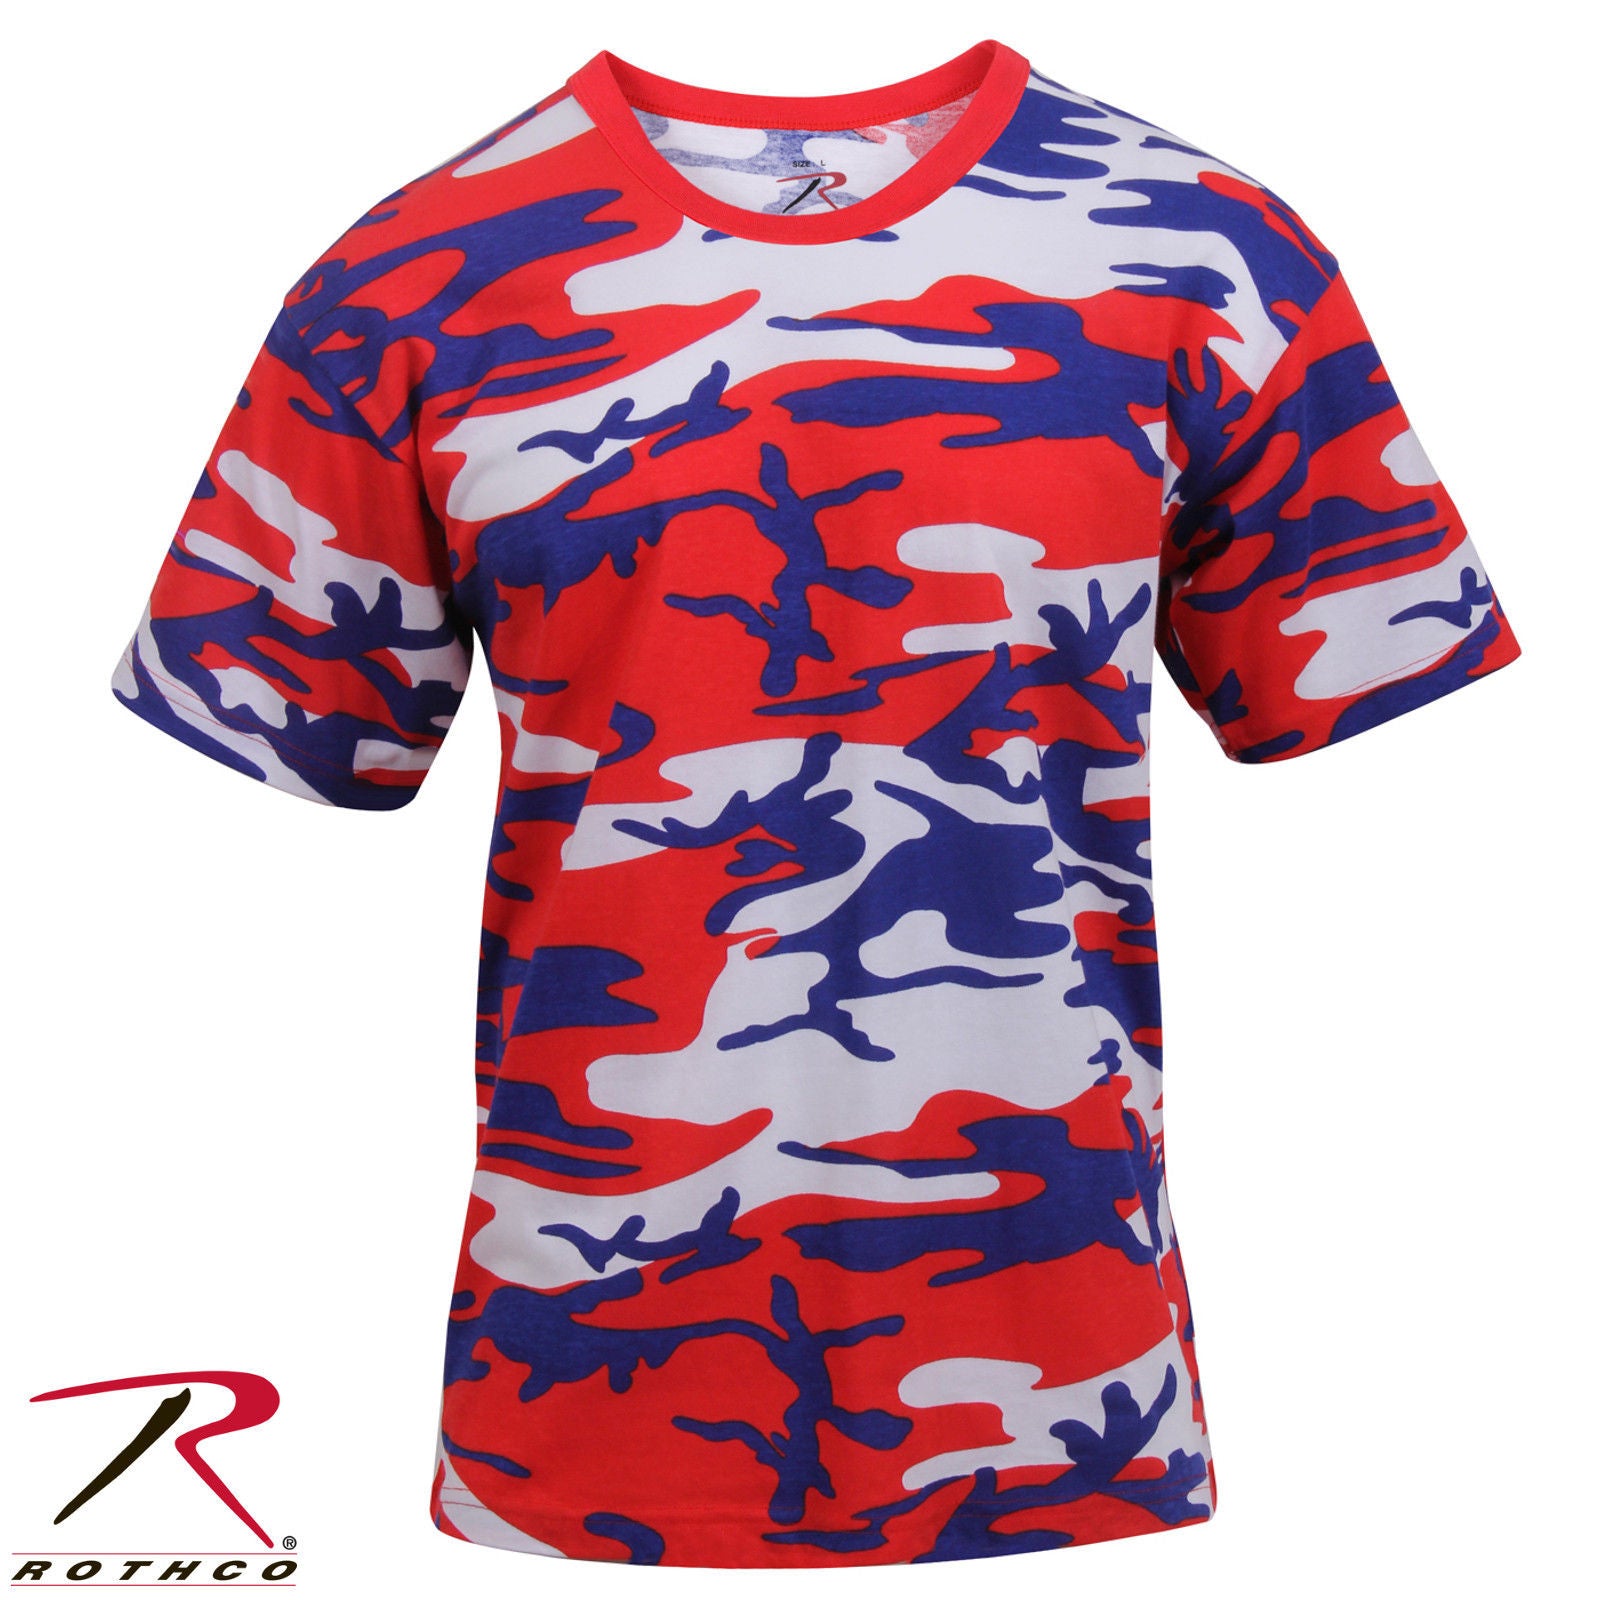 red white and blue men's outfit